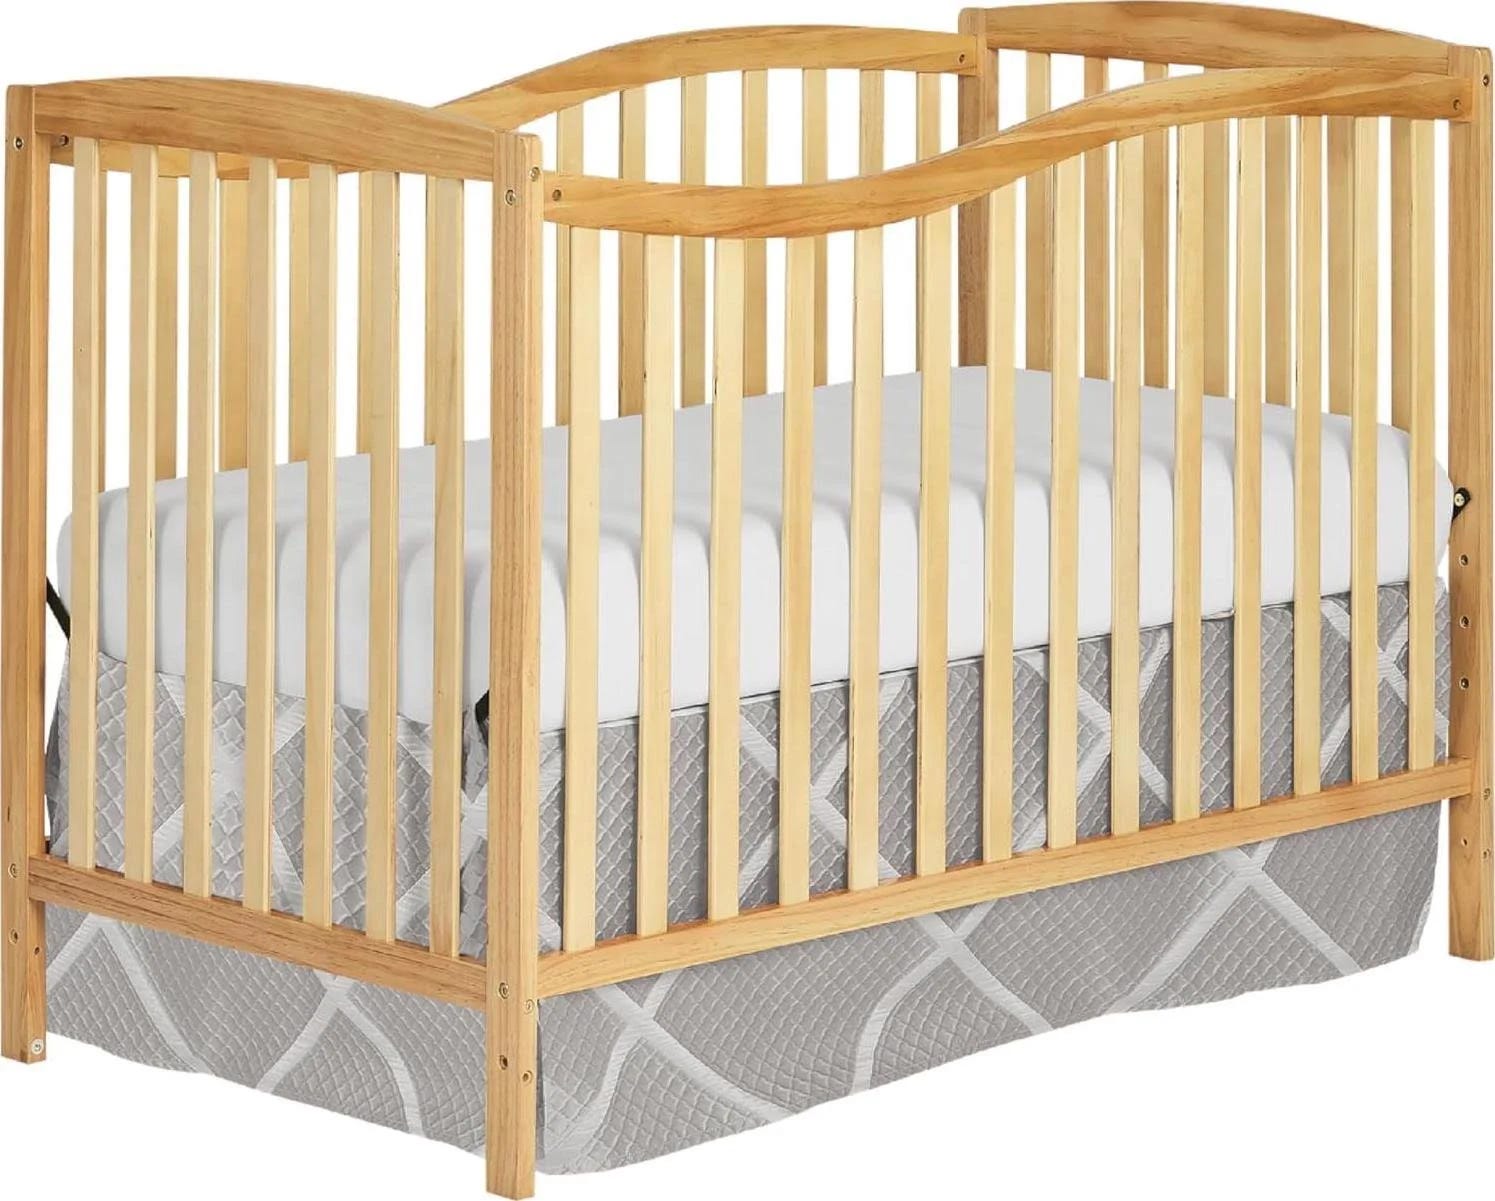 Dream On Me Chelsea 5-in-1 Convertible Crib in Natural | Image